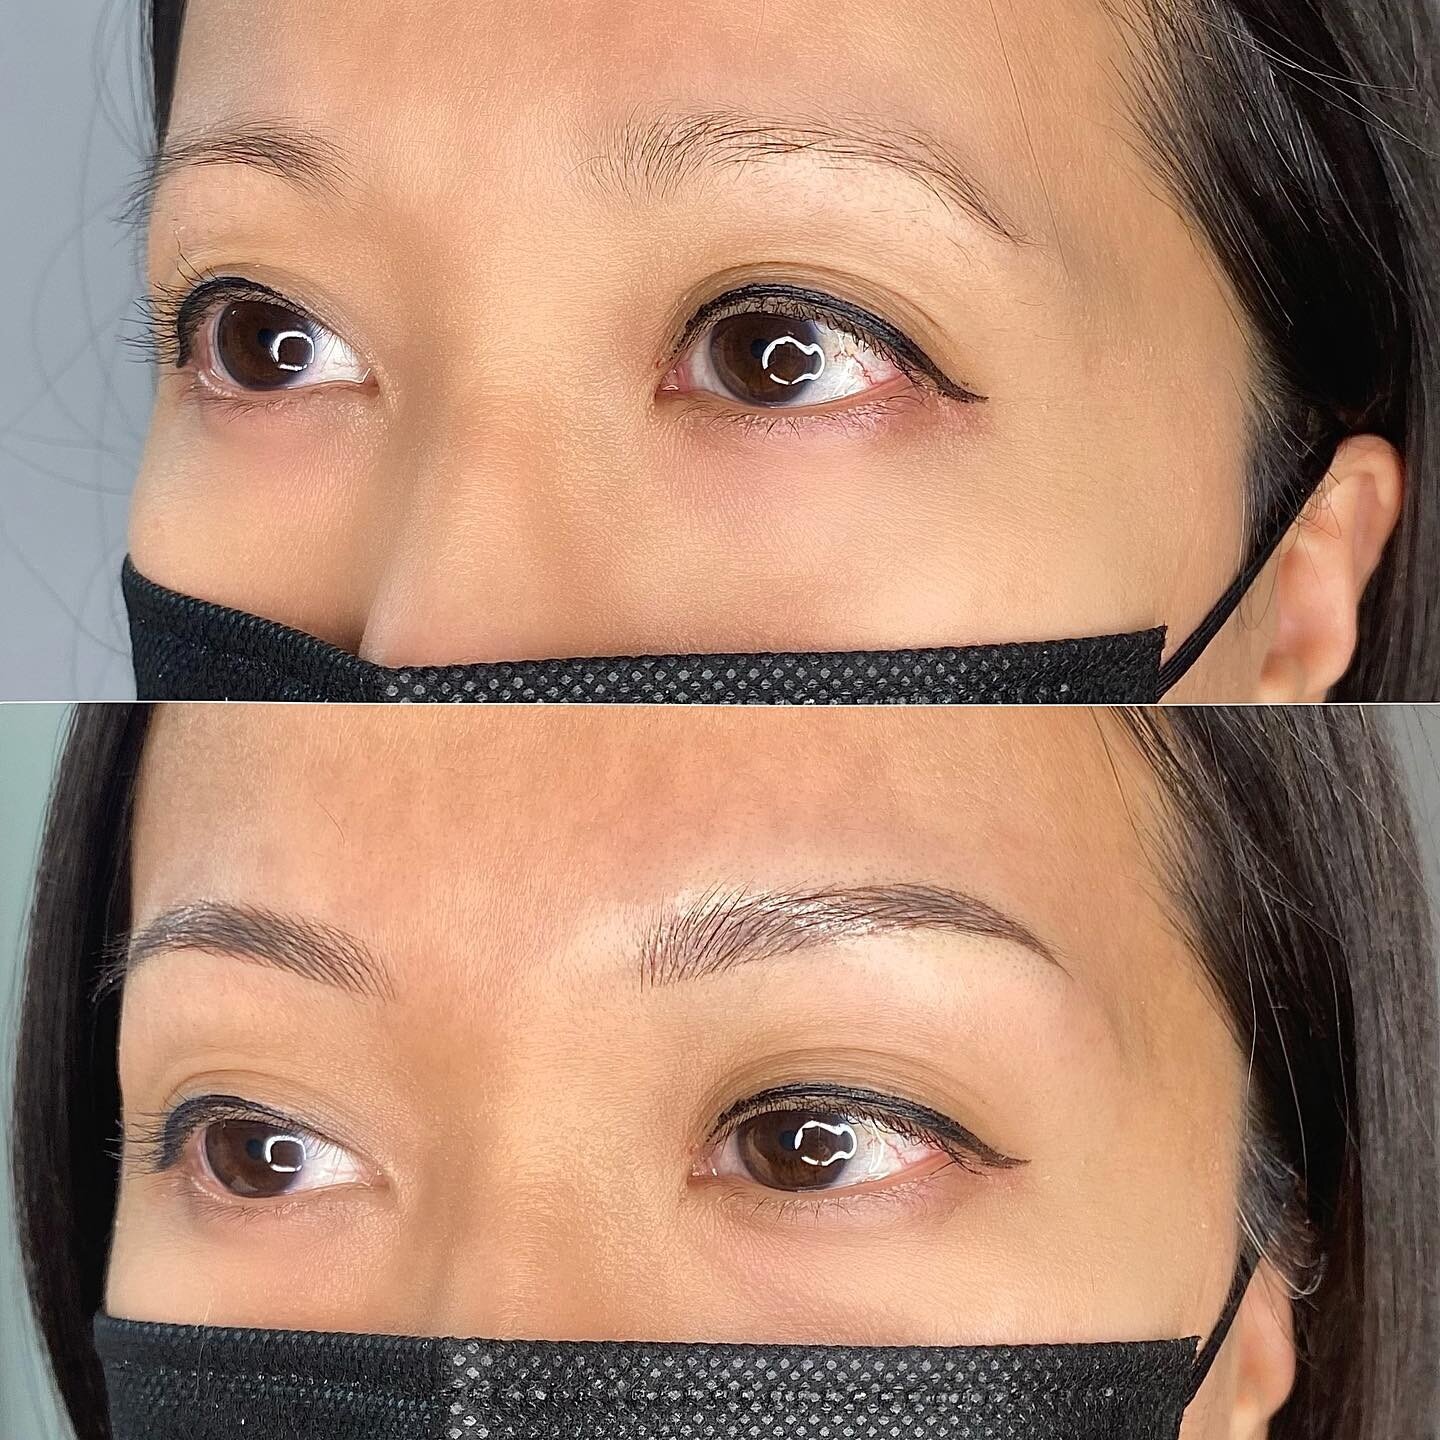 My client has been wanting to get her brows tattooed for a while now but has been hesitant for a few years as she was scared her brows would look unnatural and wanted to find an artist she felt comfortable with.

During my nano appointments, there&rs